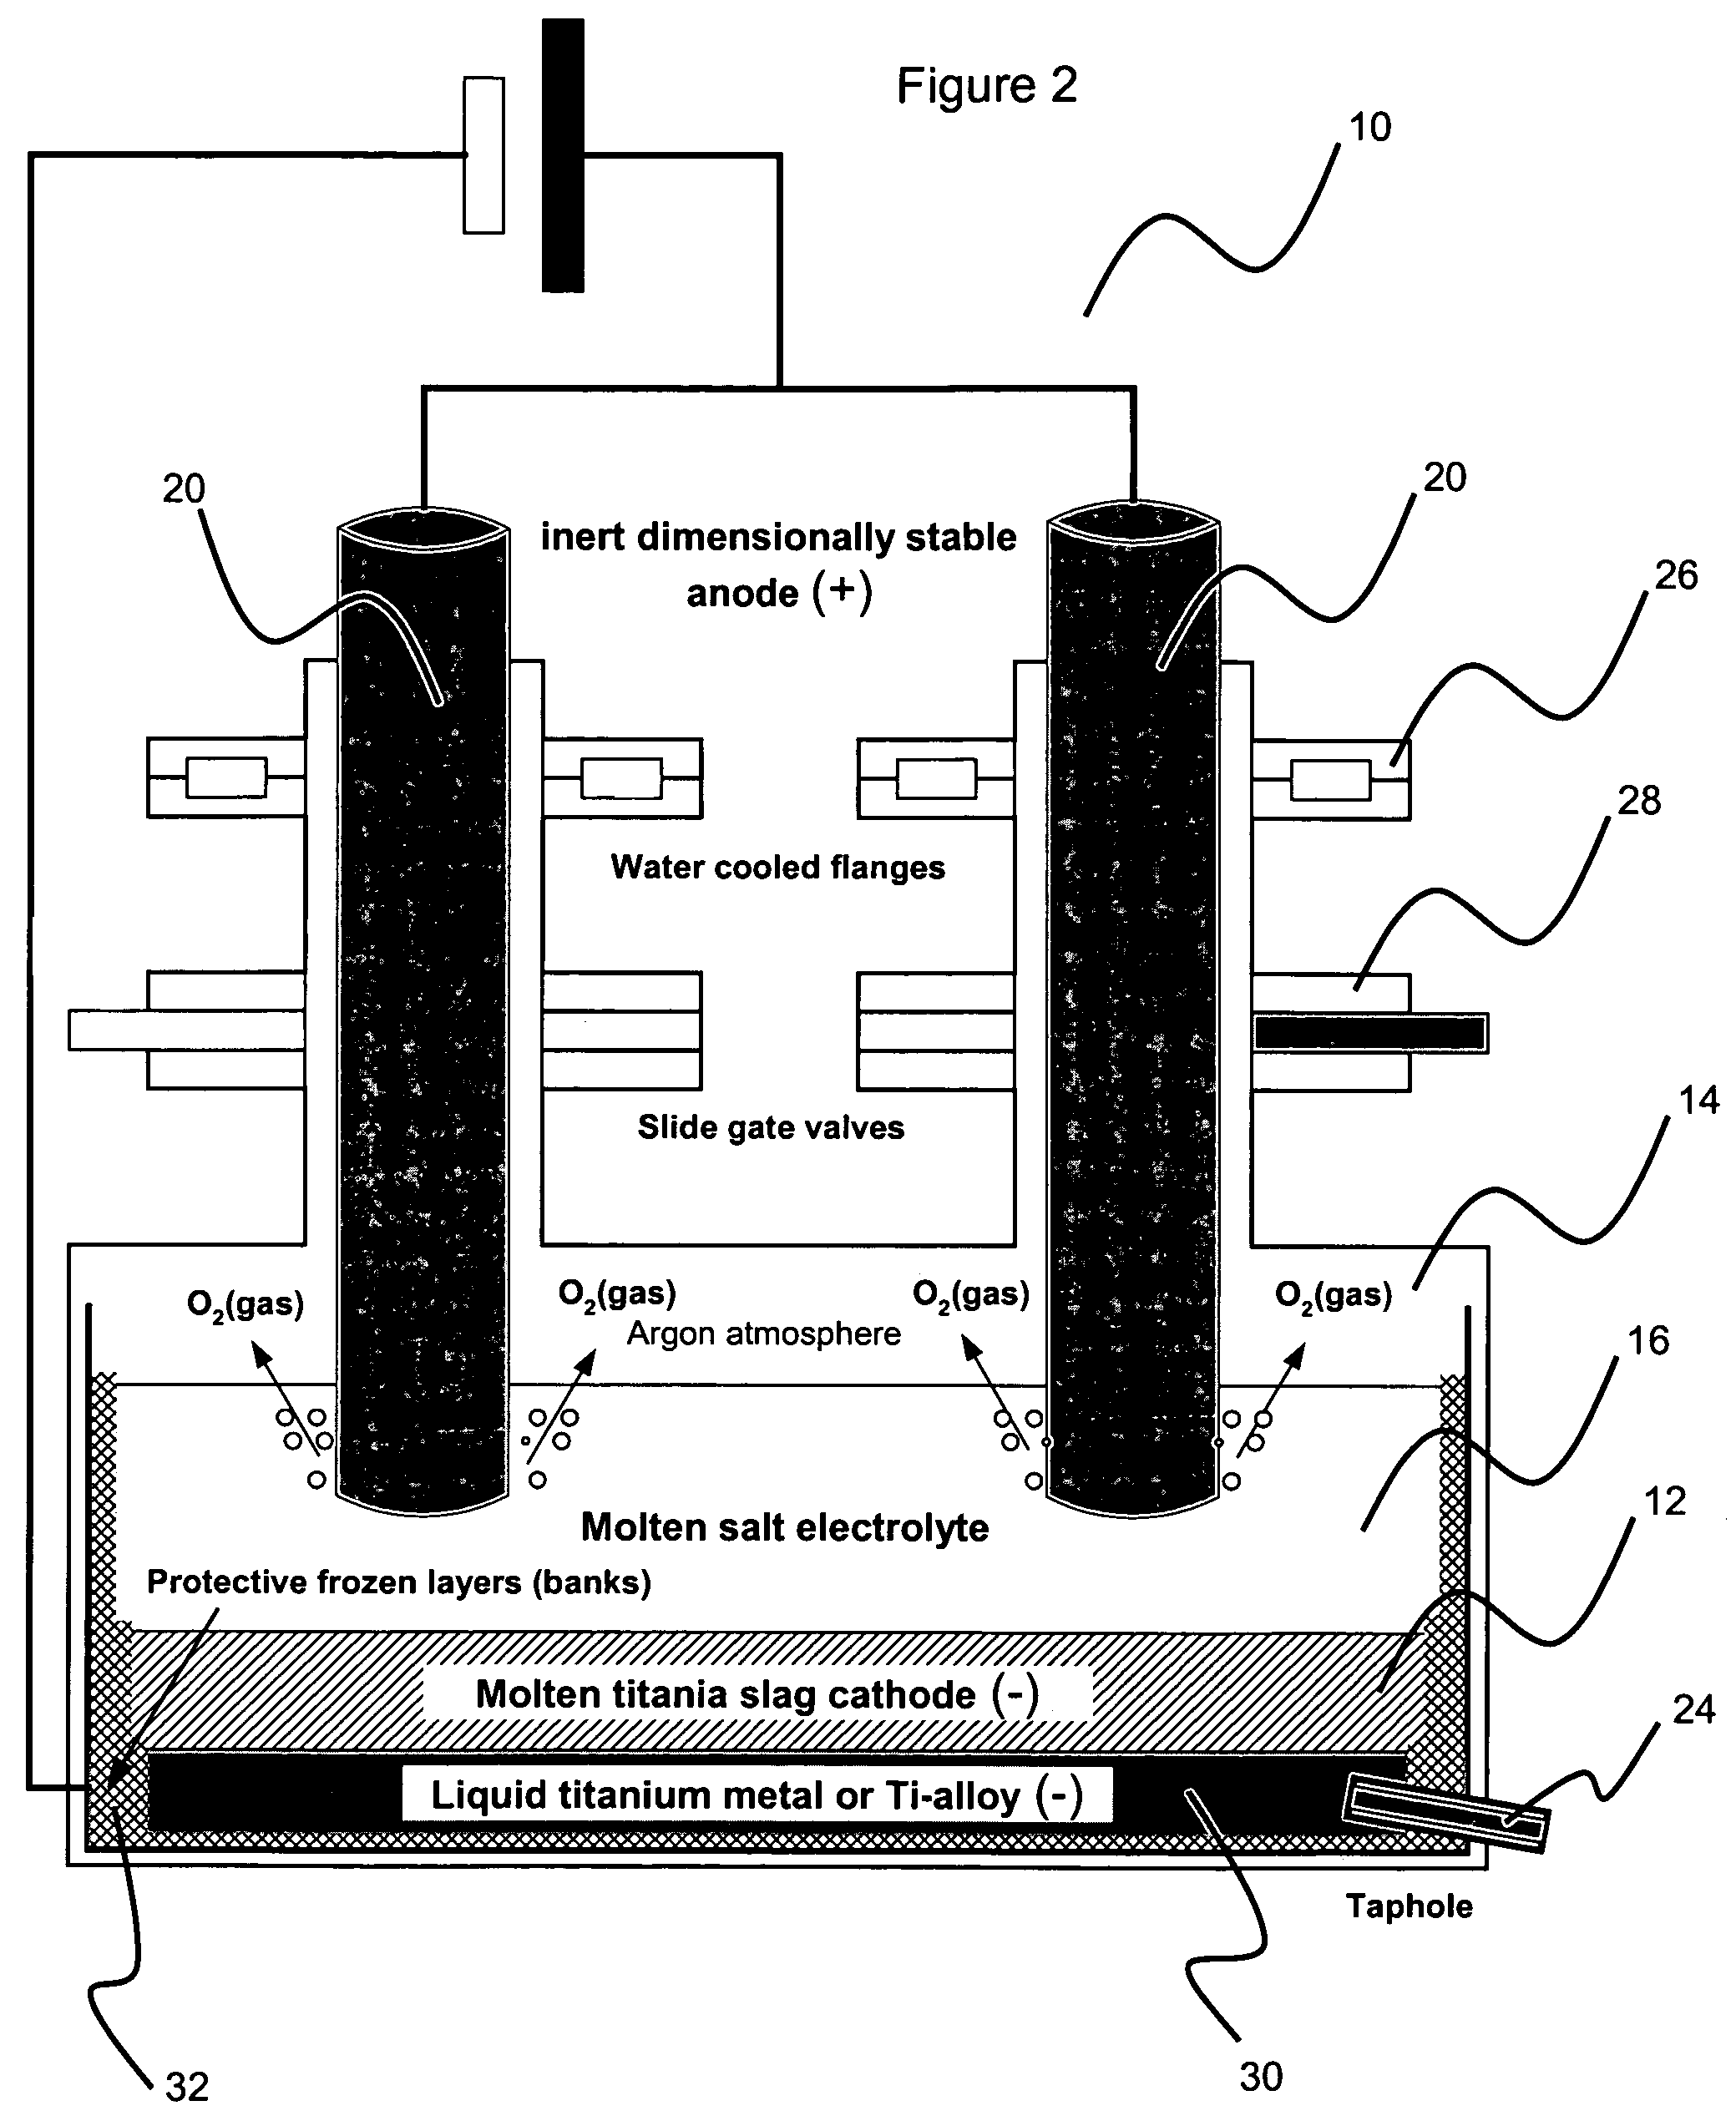 Method for electrowinning of titanium metal or alloy from titanium oxide containing compound in the liquid state